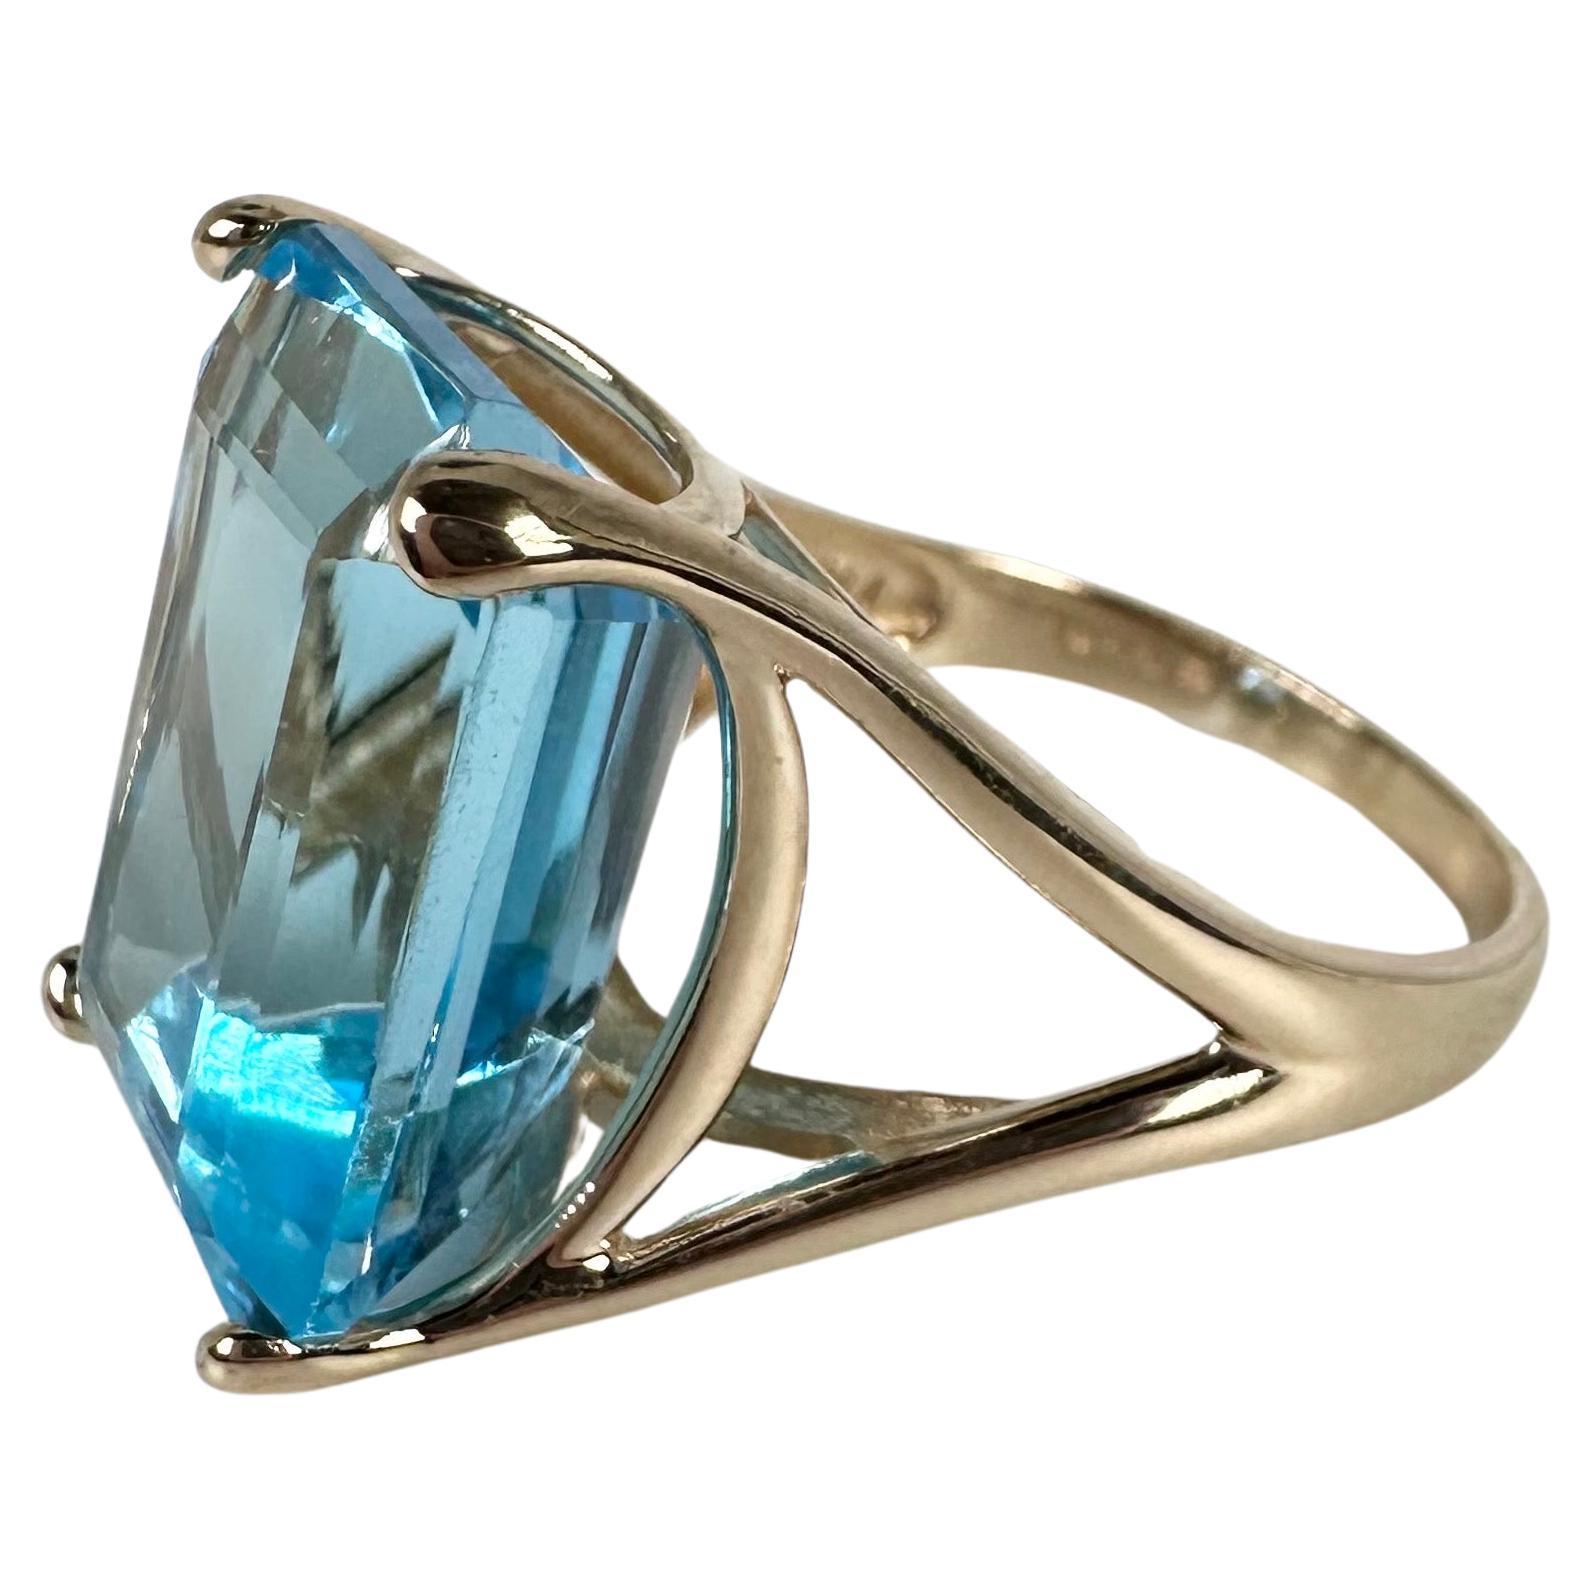 Large Swiss Blue topaz ring in 14KT yellow gold, a unique statement ring with a character.

GOLD: 14KT gold
NATURAL TOPAZ(S)
Clarity/Color: Slightly Included/Swiss Blue
Cut: Emerald
Measurements:17x13mm 
Grams:7.85
size: 8
Item#: 200-00063KME

WHAT